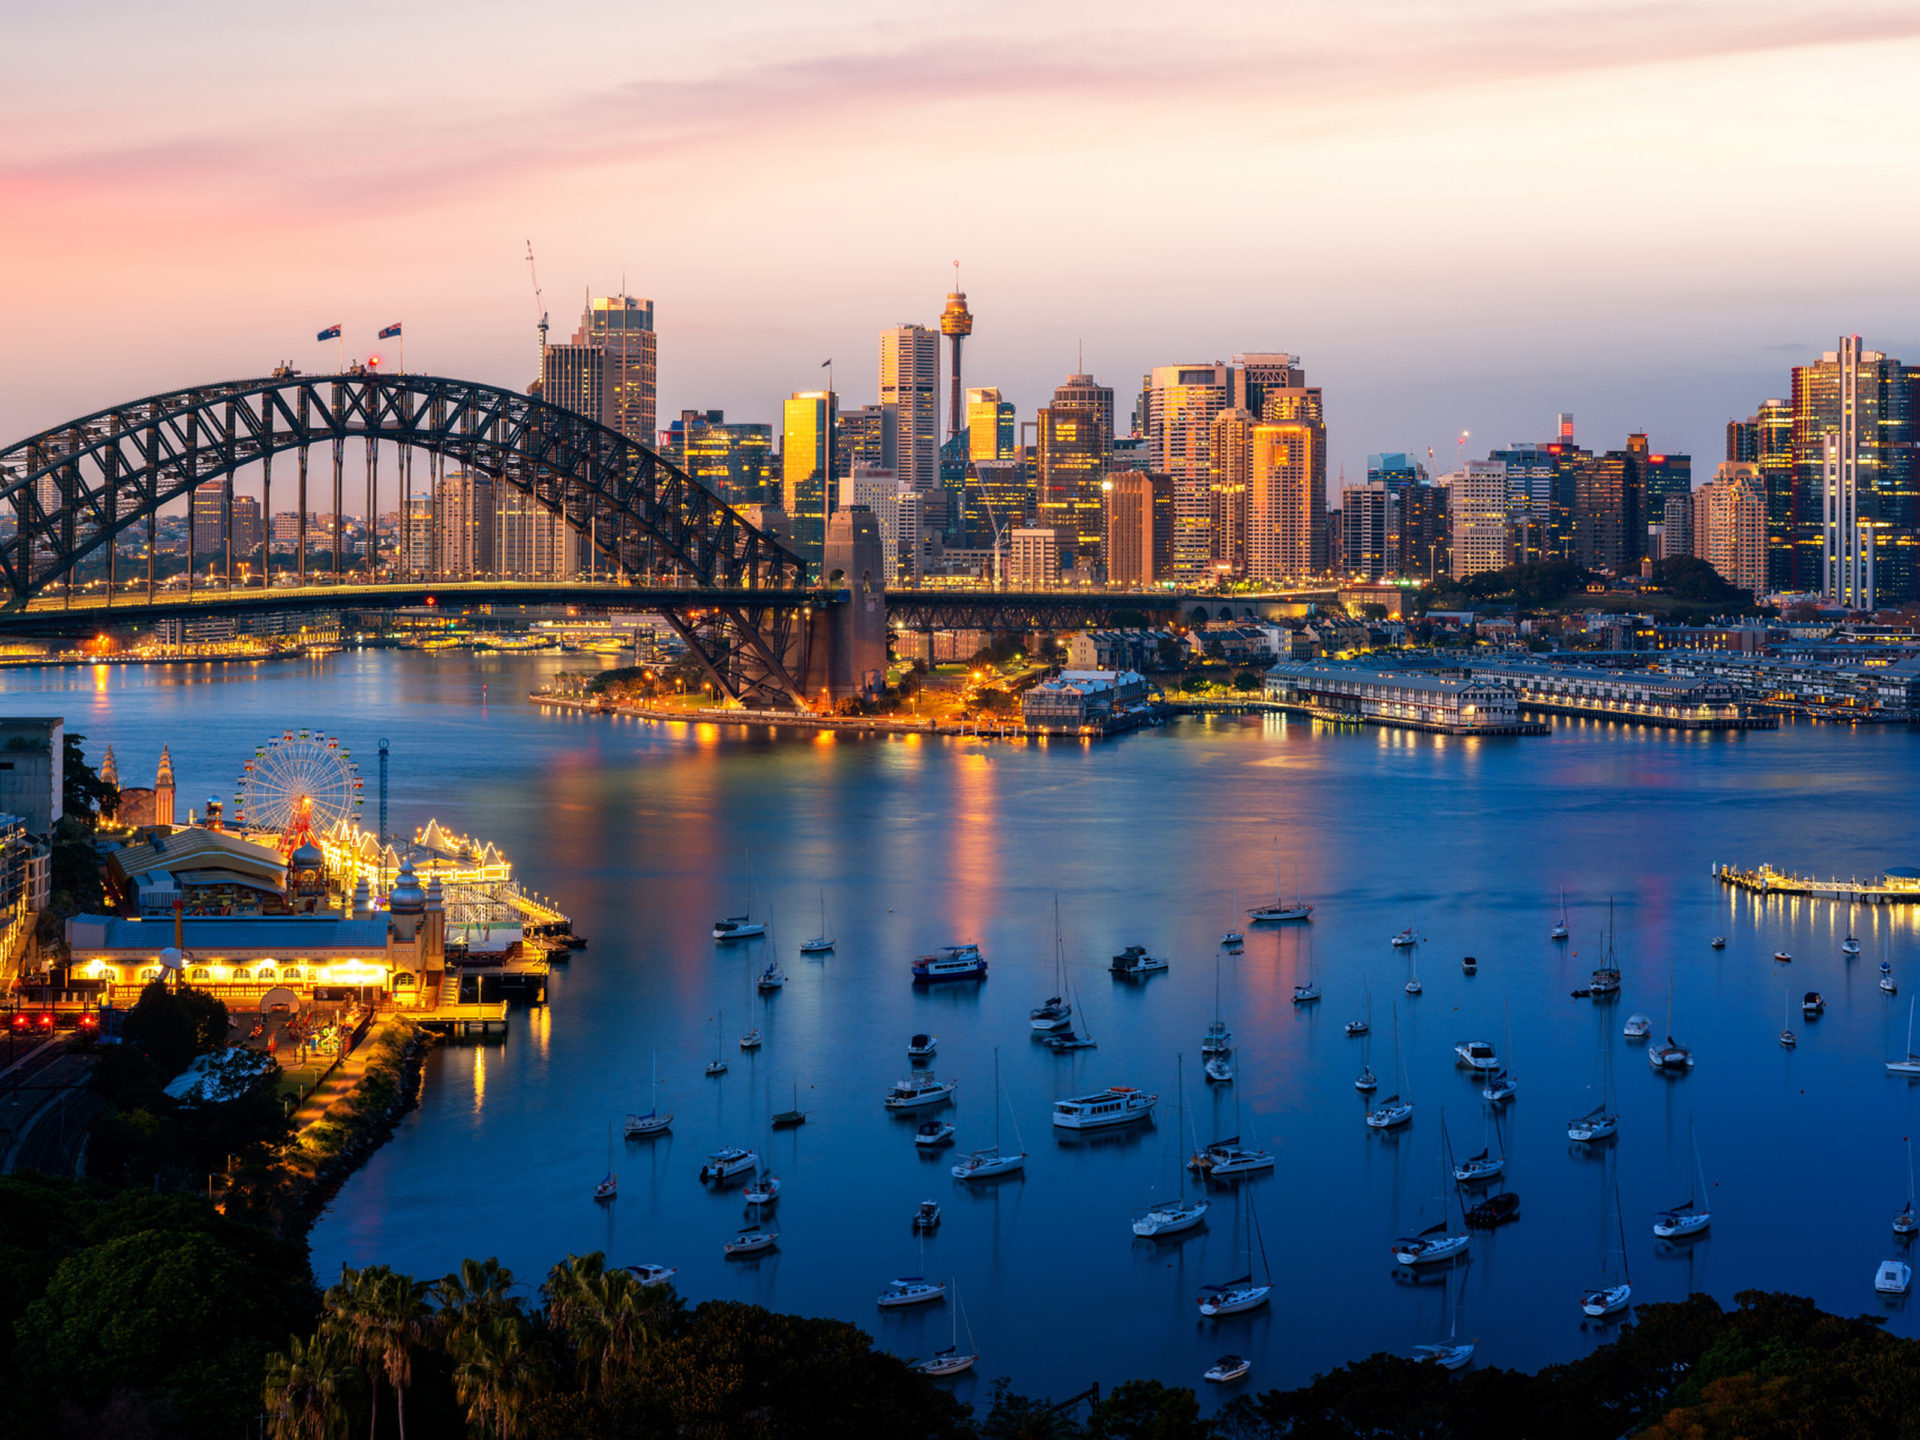 Sydney: New South Wales, Australia, Panorama Of The Port And Bridge. 1920x1440 HD Wallpaper.